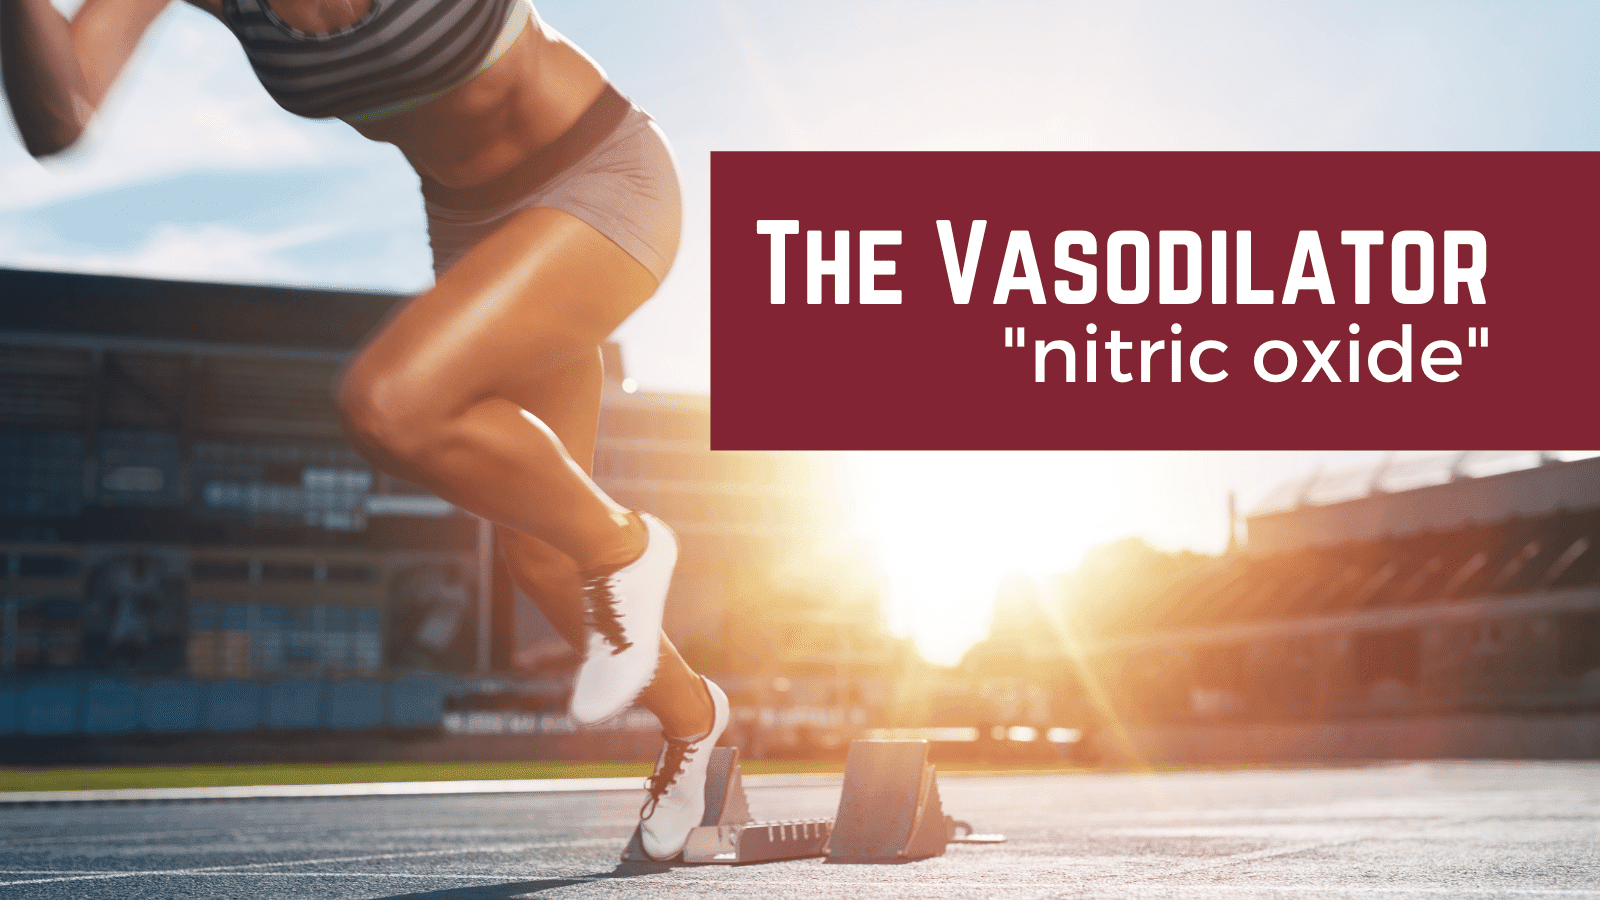 How does nitric oxide cause vasodilation? | NutriGardens